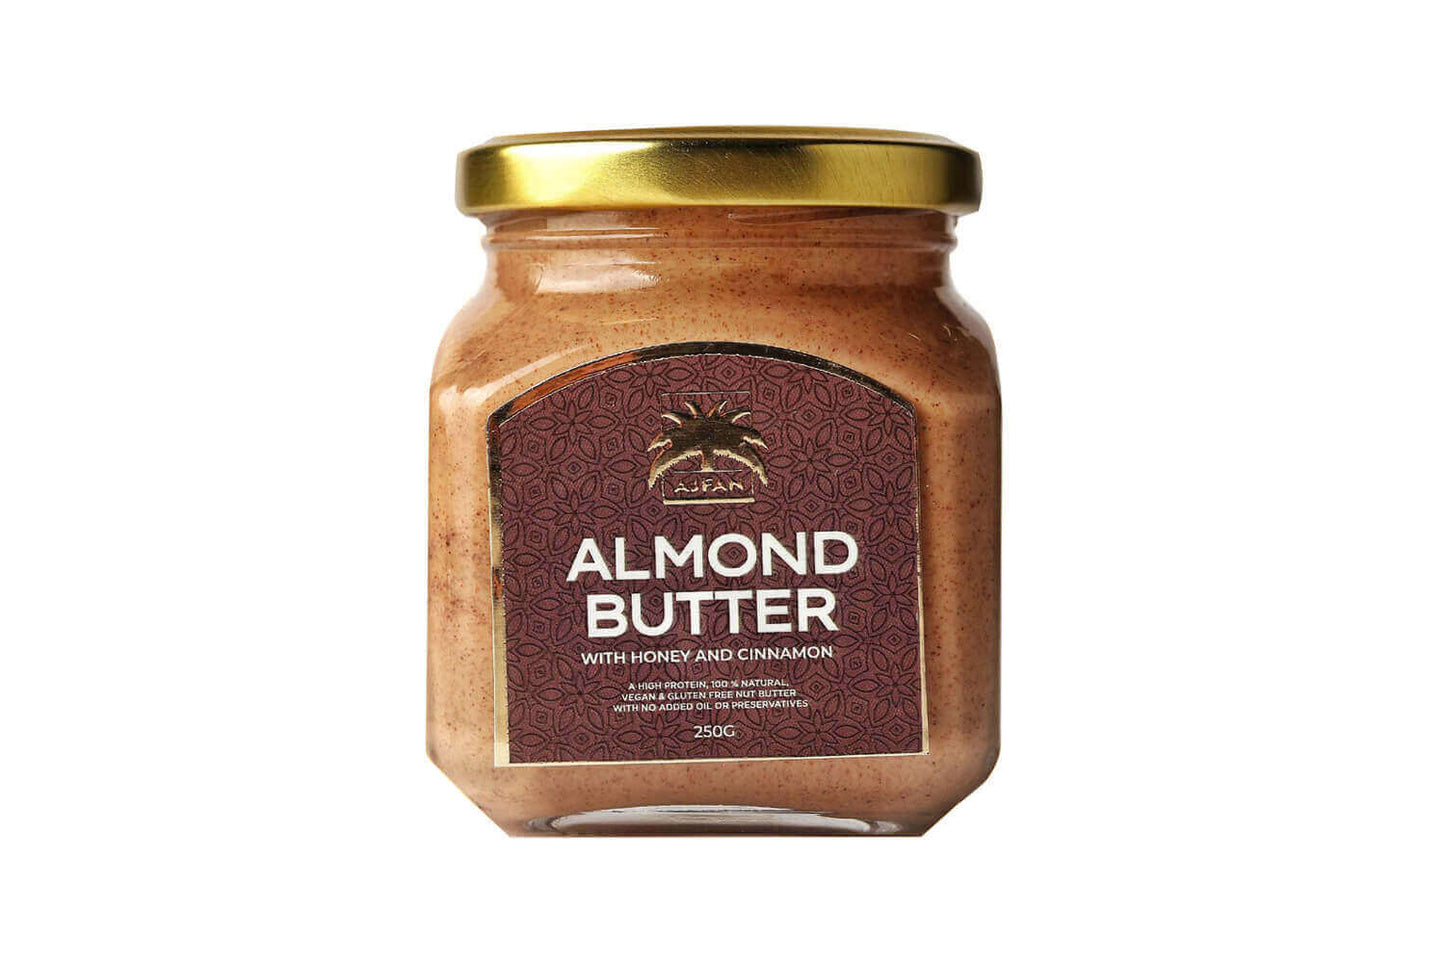 Almond Butter with Honey and Cinnamon